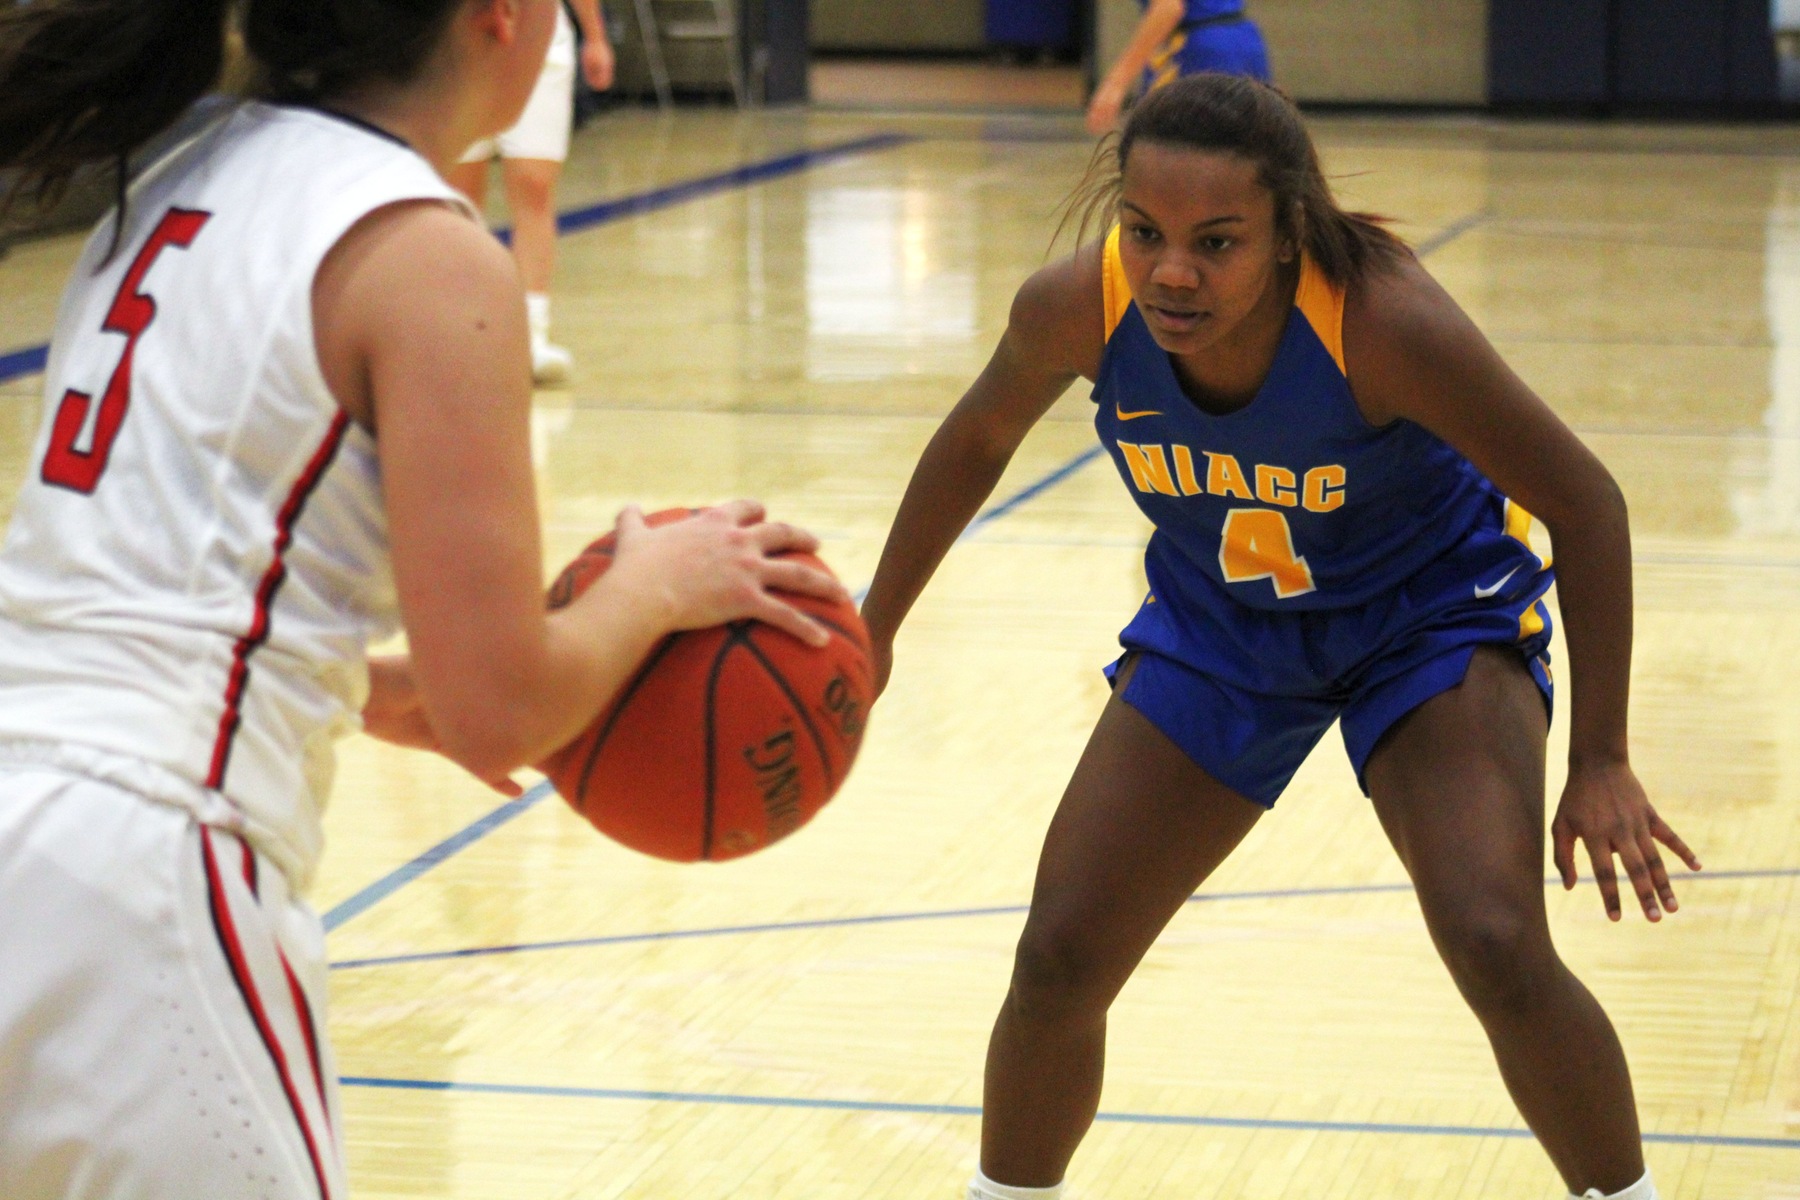 NIACC's Sana'a Smith defends during Saturday's game against Northeast CC in Fort Dodge.